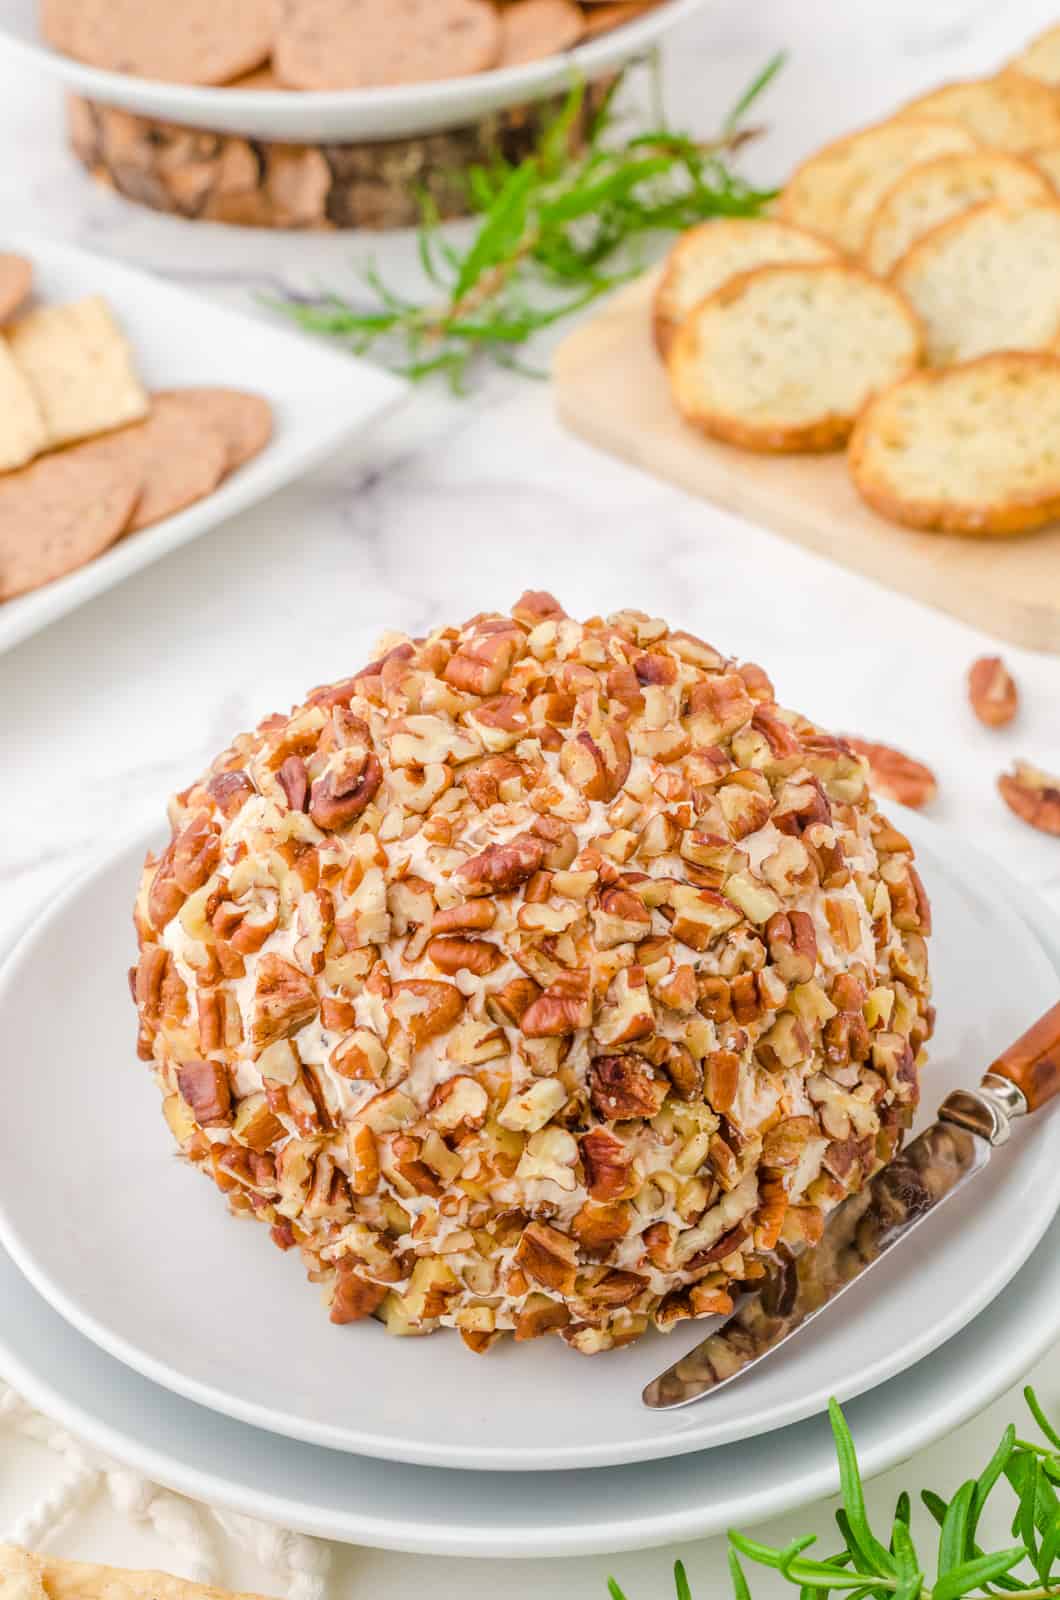 Sun-Dried Tomato Cheese Ball Recipe on plate with fork and dippers in background.